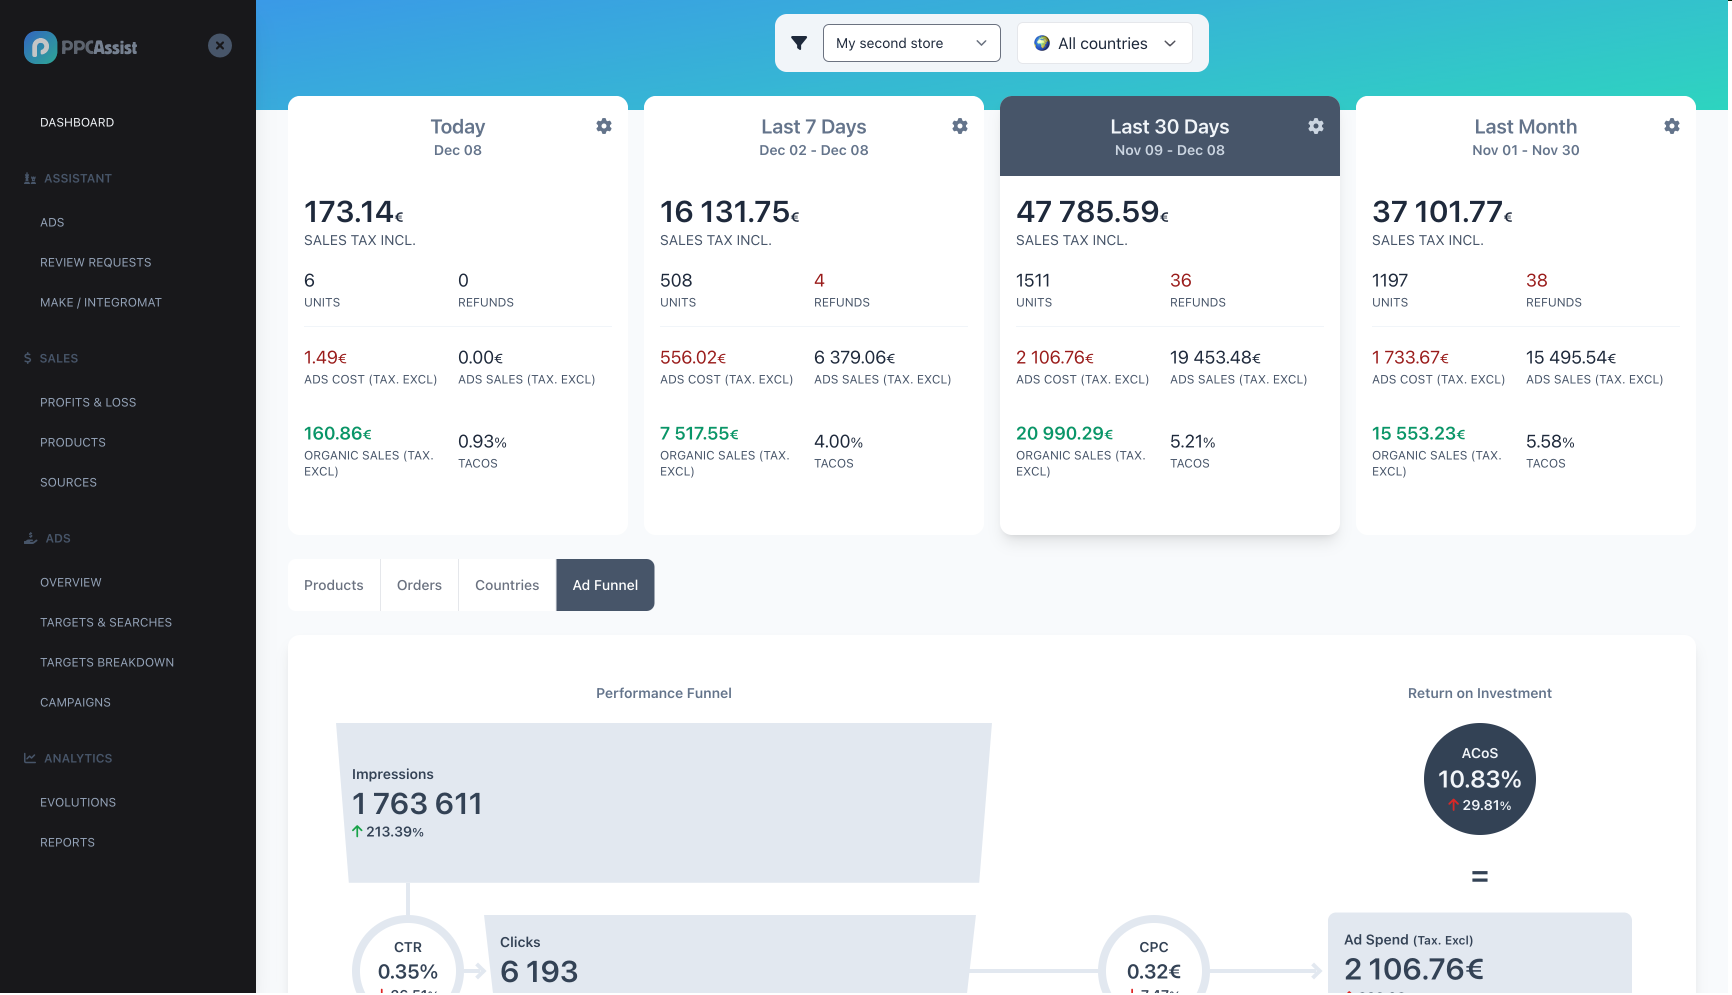 All your key metrics in a nice intuitive dashboard